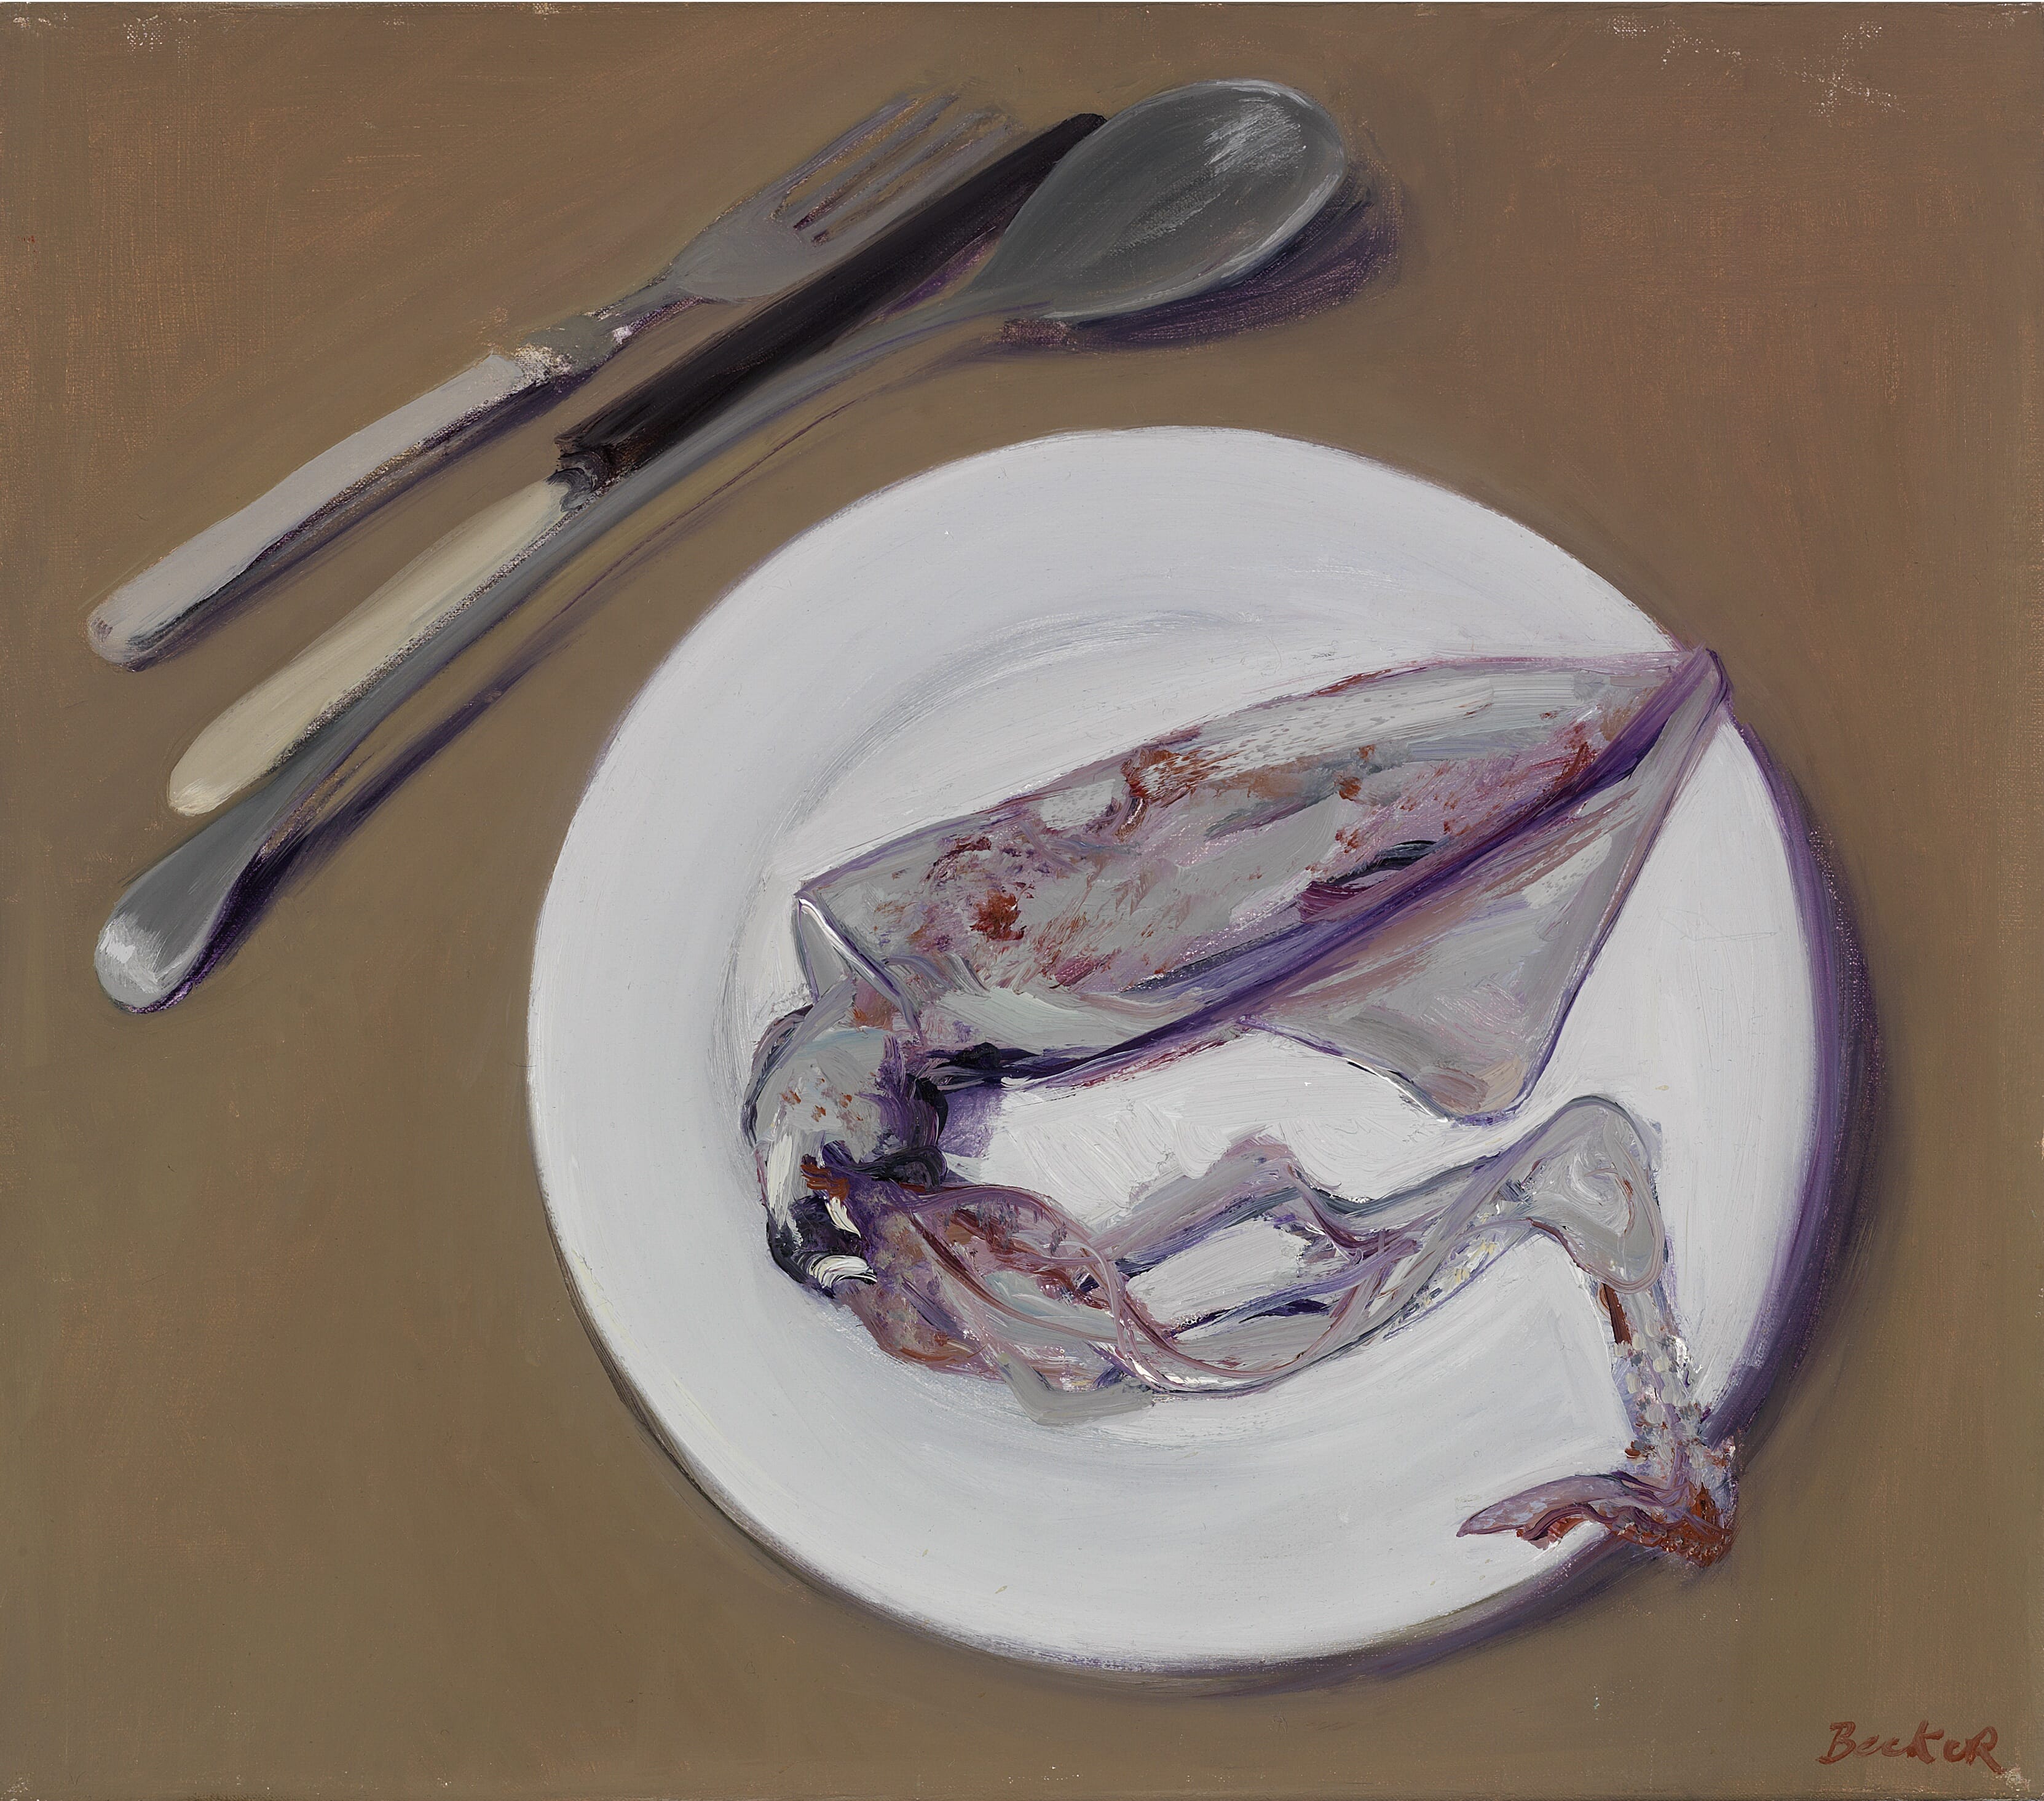  Squid, Knife, Fork and Spoon